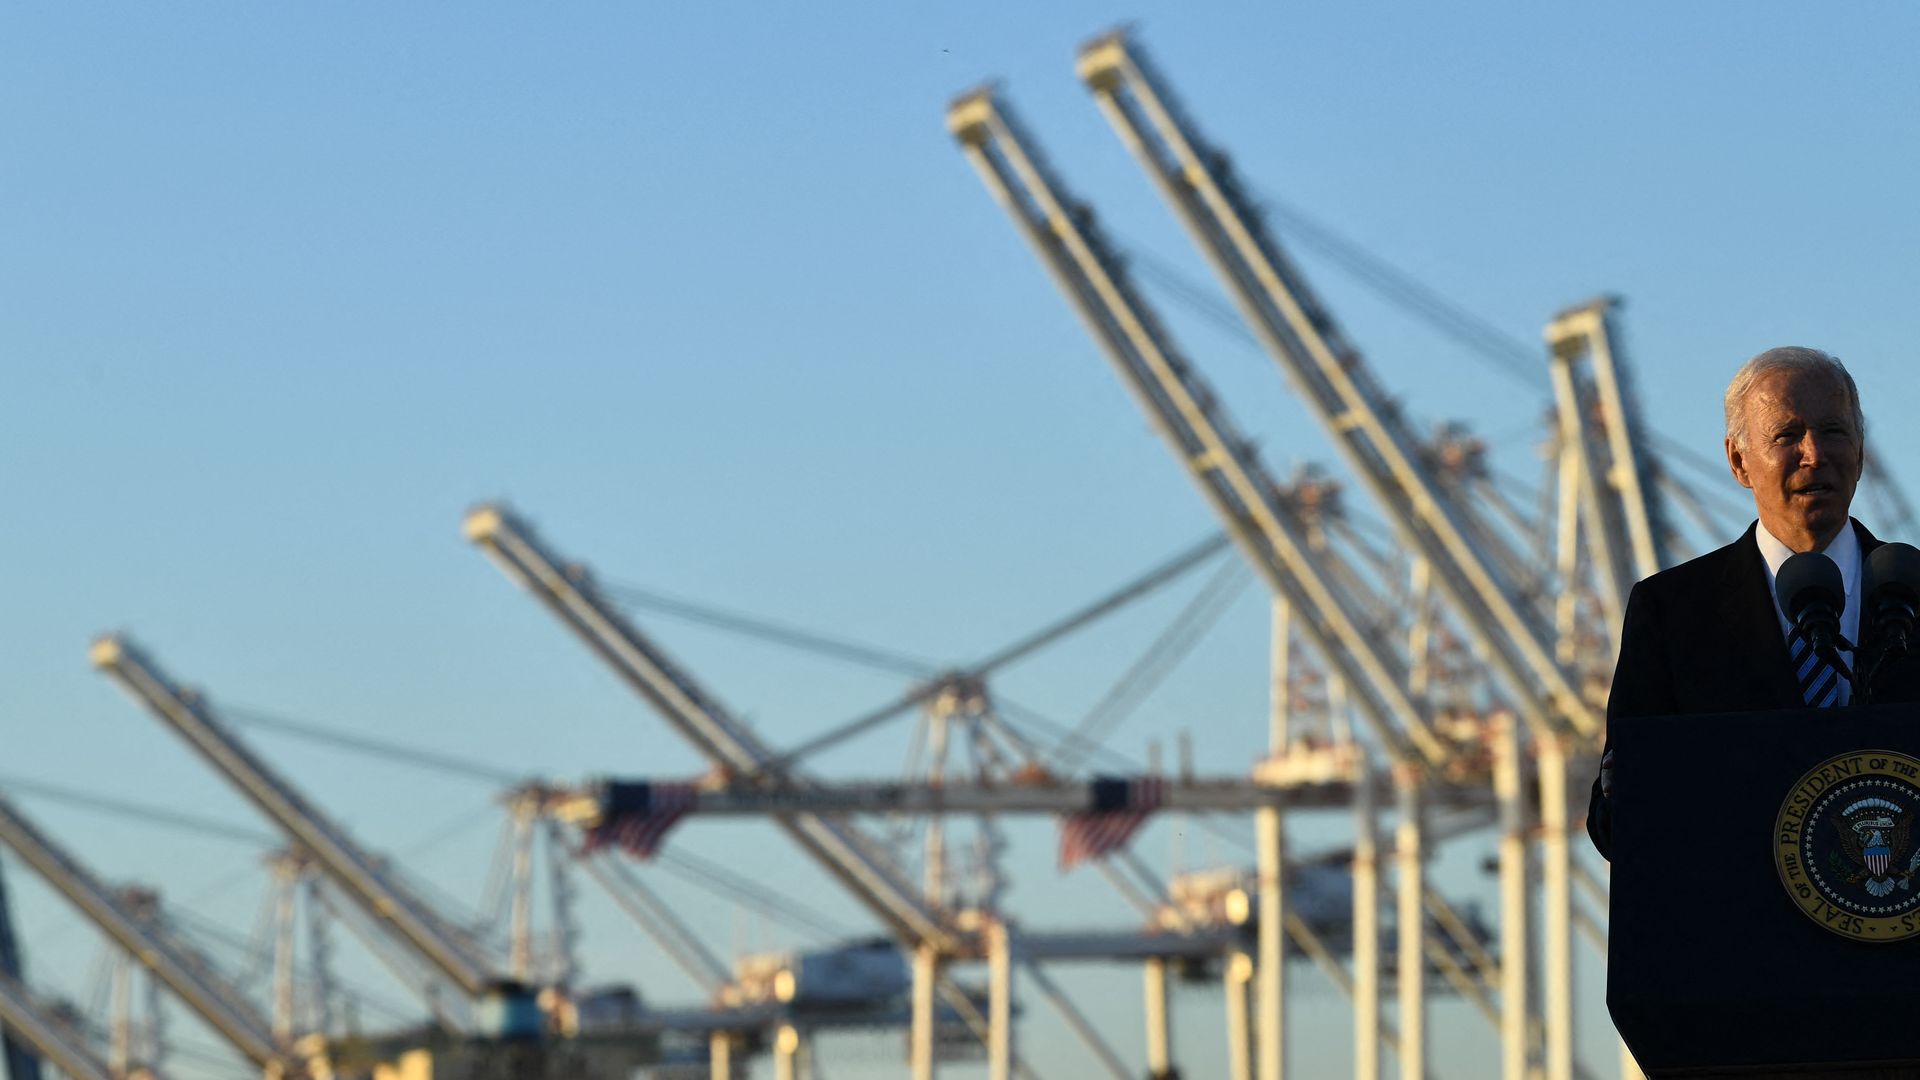 President Biden is seen speaking before sets of cranes at the Port of Baltimore.